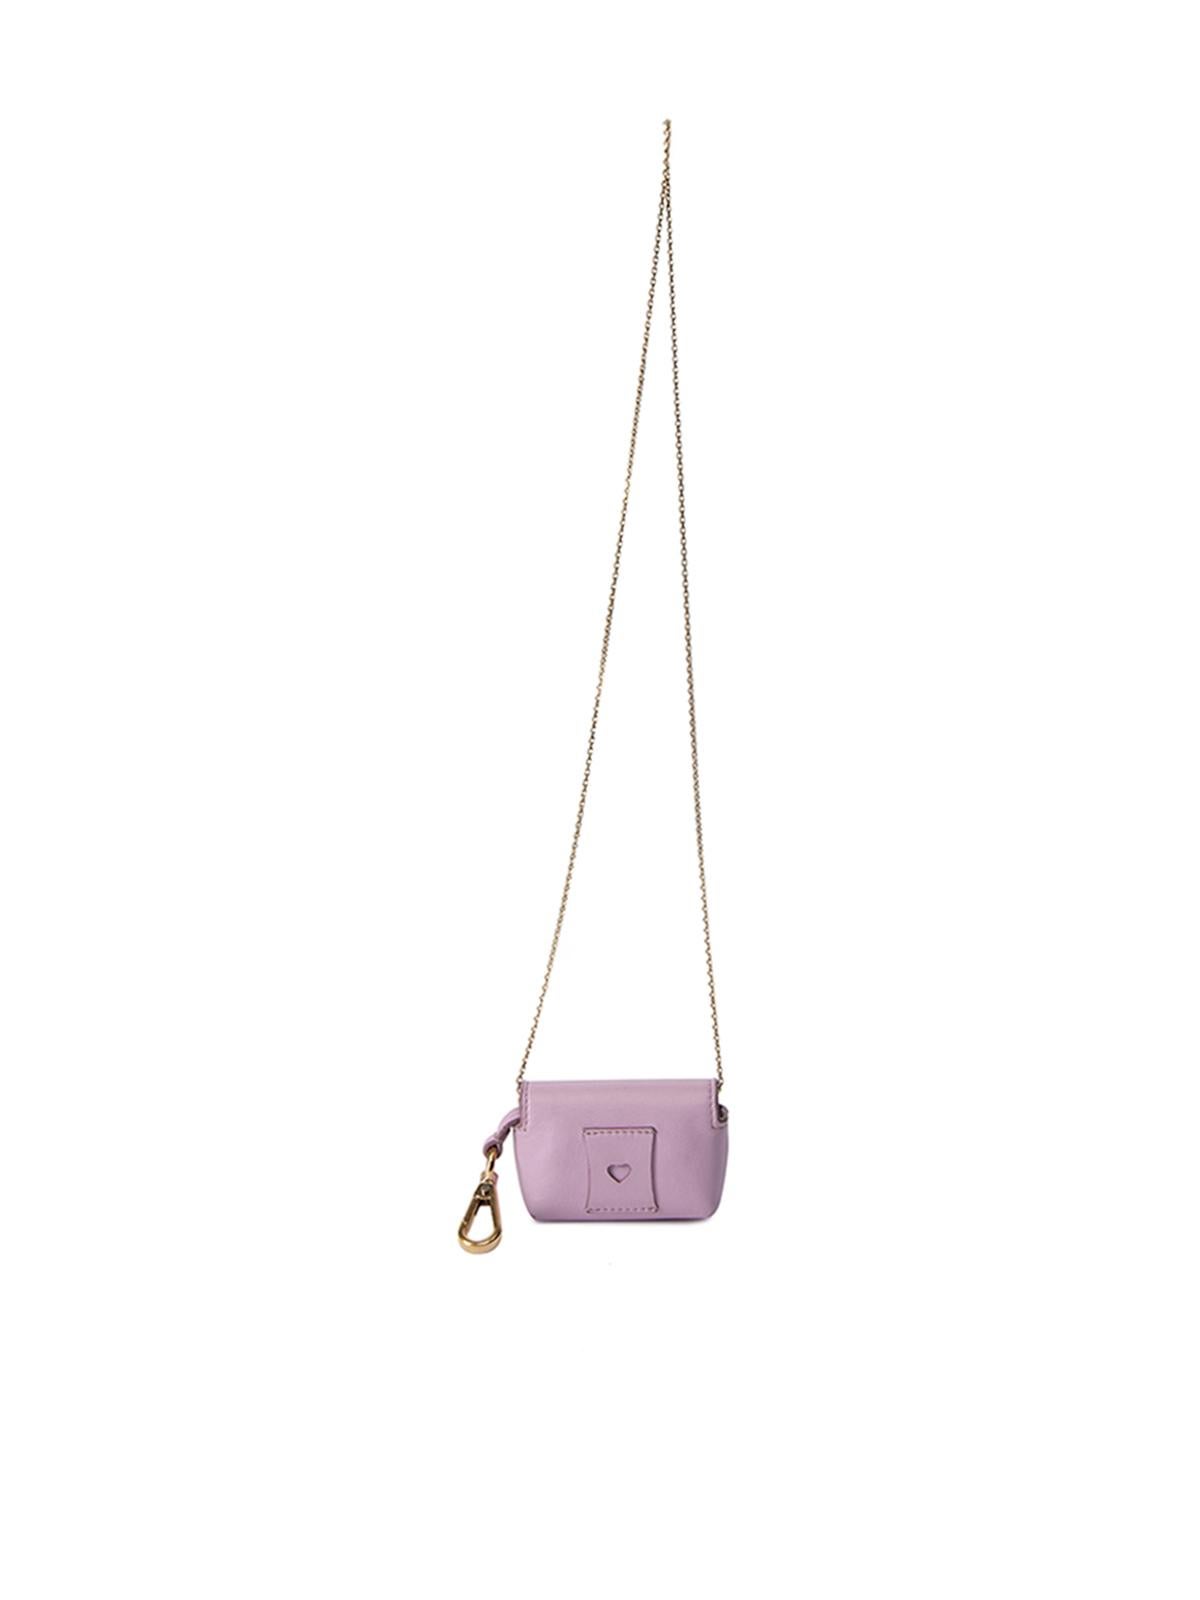 Roger Vivier Women's Pink Broche Vivier Buckle Mini Pouch Keyring In Good Condition For Sale In London, GB